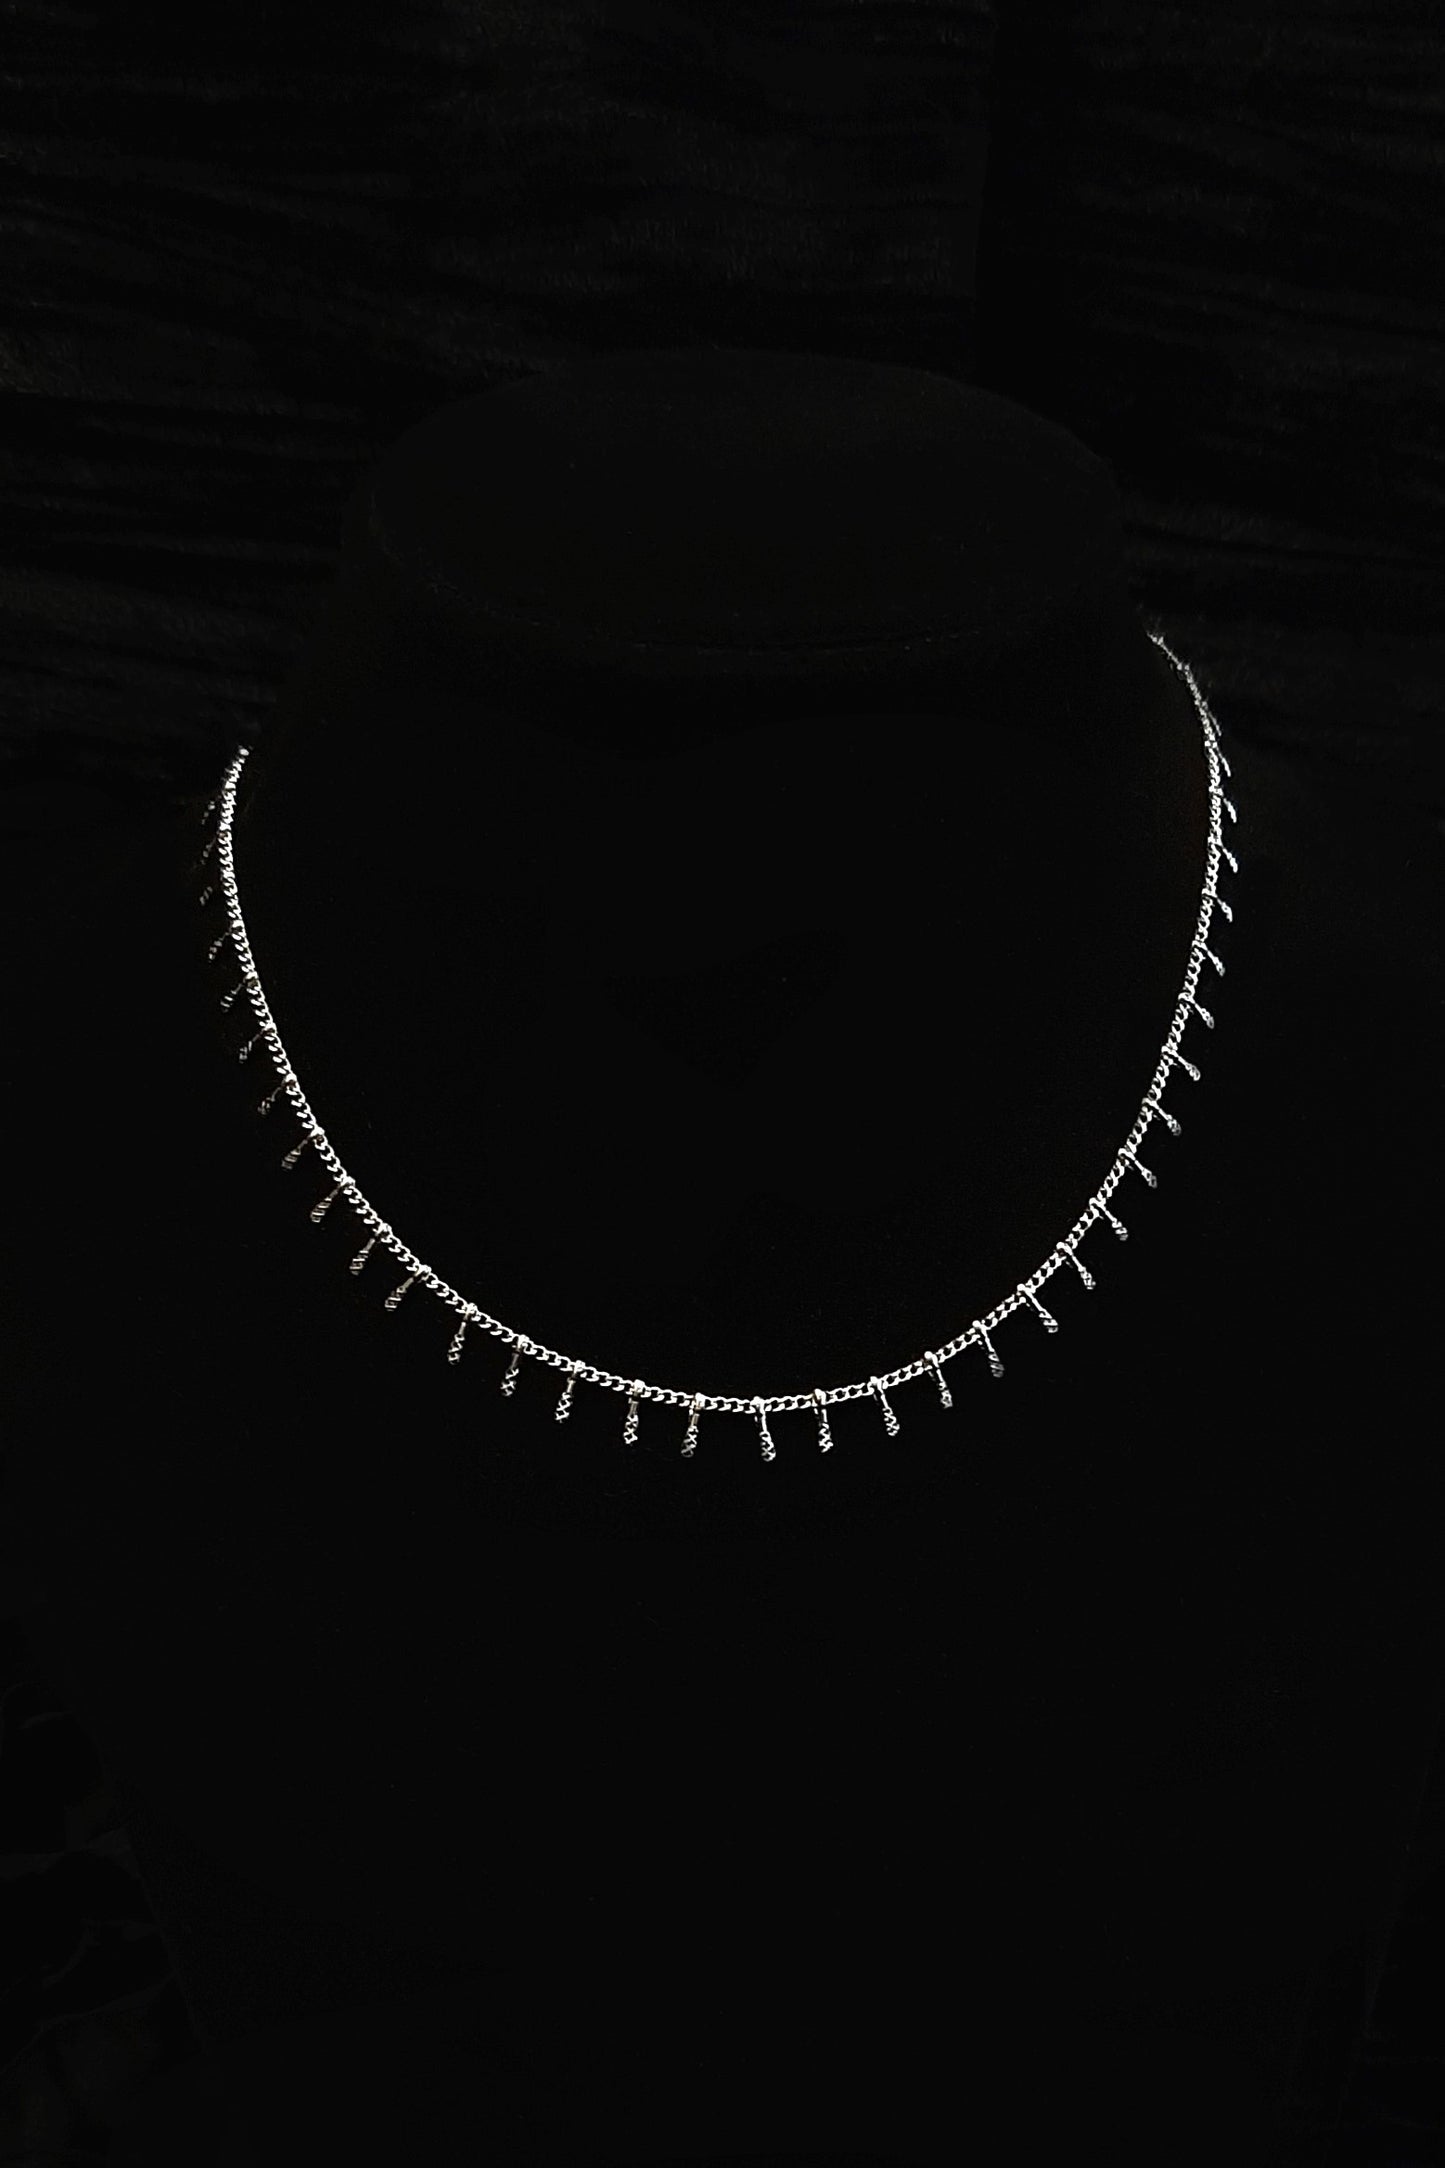 Spark chain choker necklace- 𝖔𝖓𝖊 𝖑𝖊𝖋𝖙 !